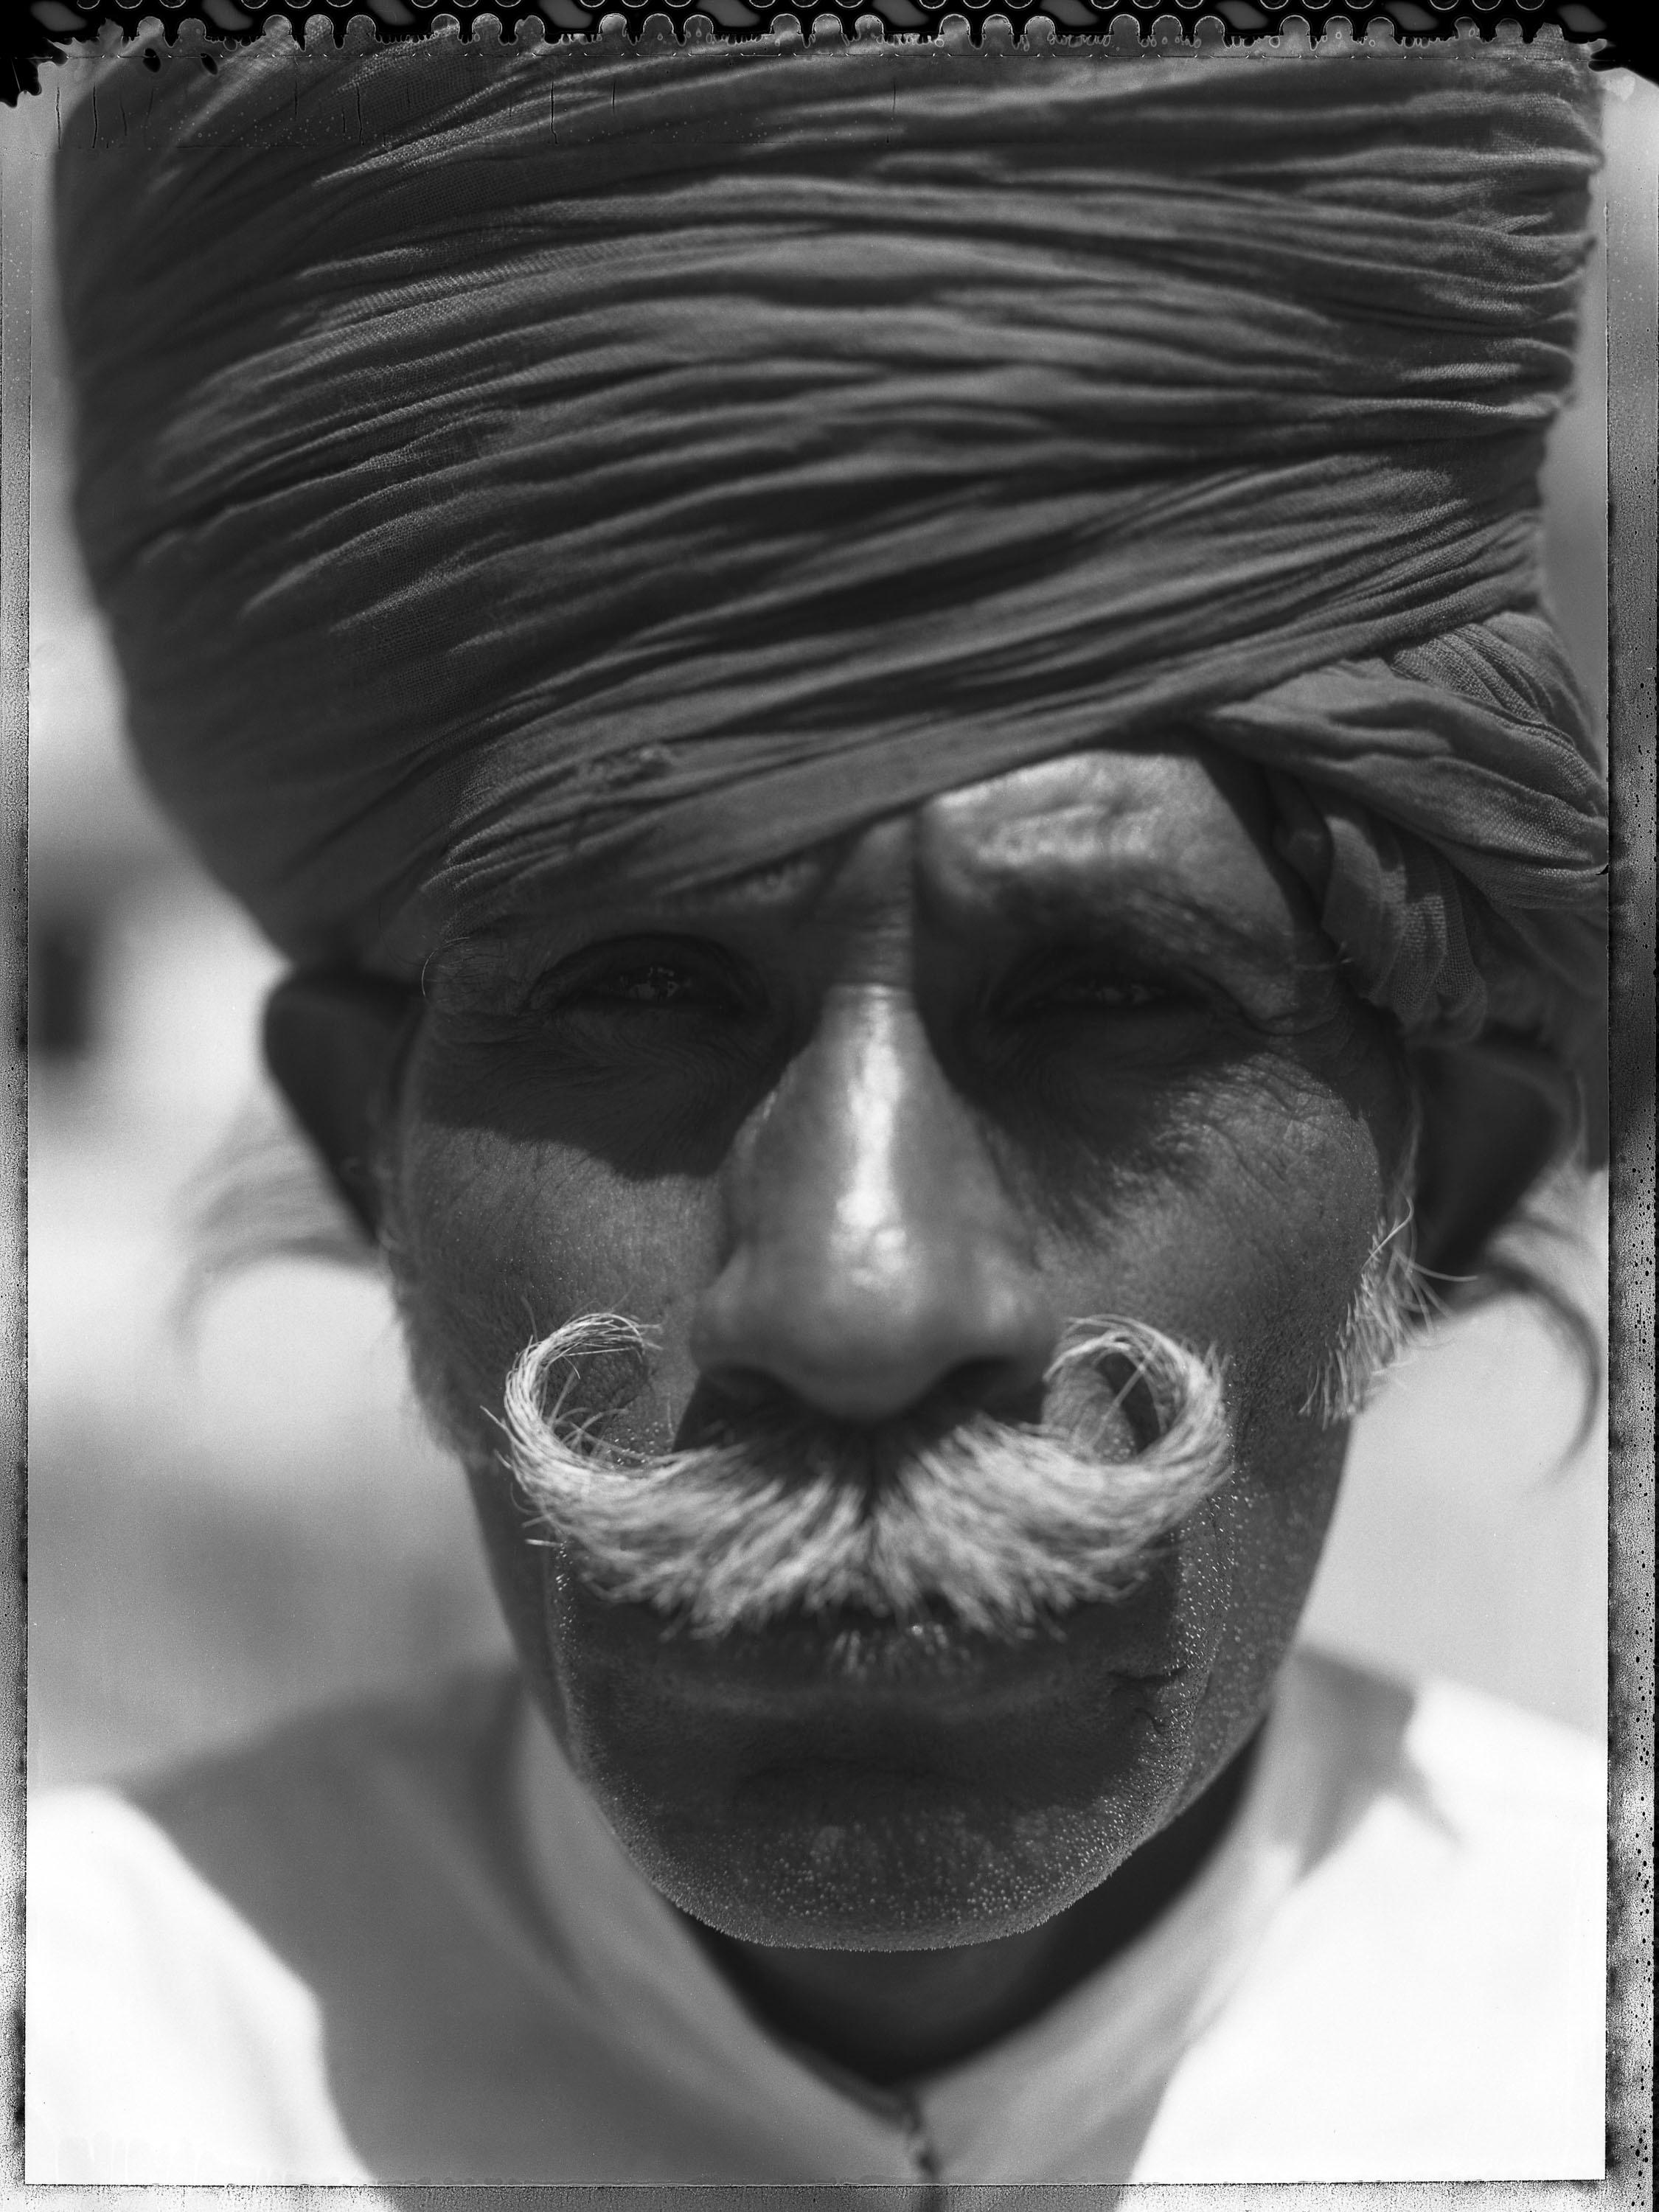 Carlo Bevilacqua Black and White Photograph - Rajput - Rajastan -India (from Indian Stills series )